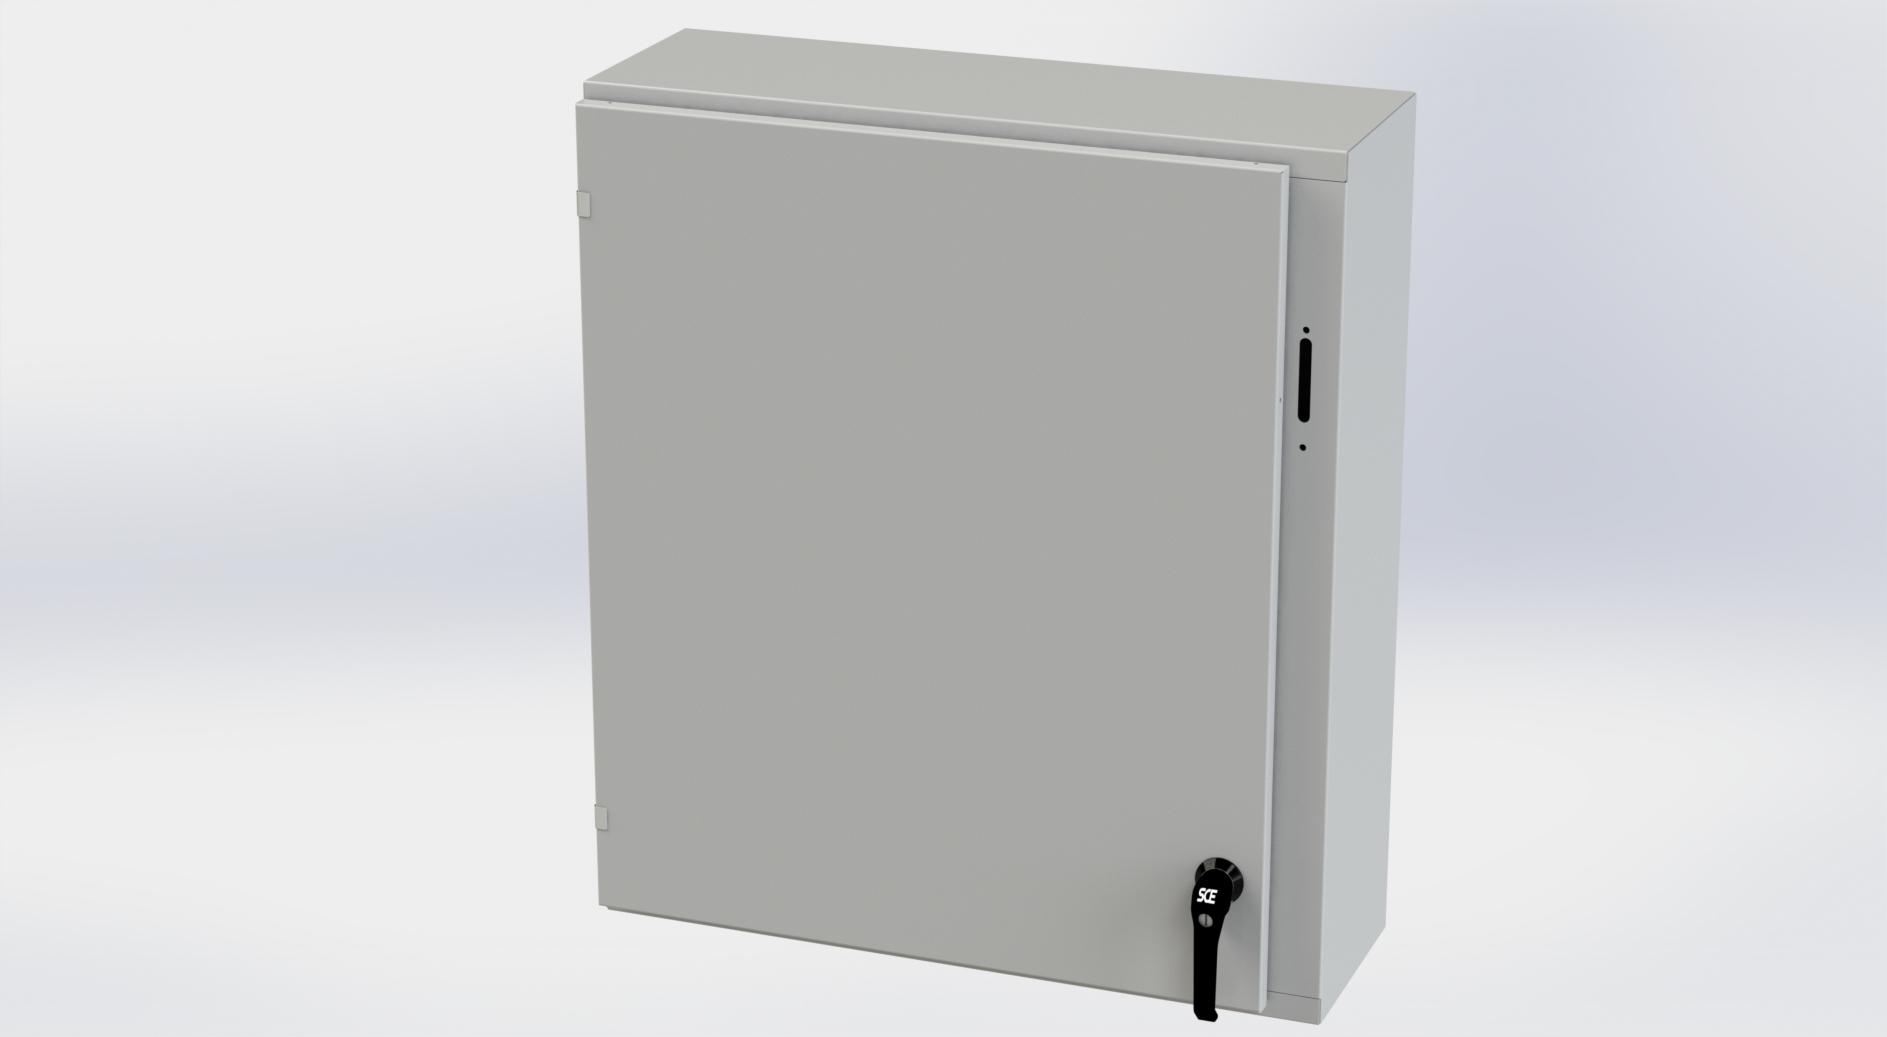 Saginaw Control SCE-36XEL3110LPLG XEL LP Enclosure, Height:36.00", Width:31.38", Depth:10.00", RAL 7035 gray powder coating inside and out. Optional sub-panels are powder coated white.